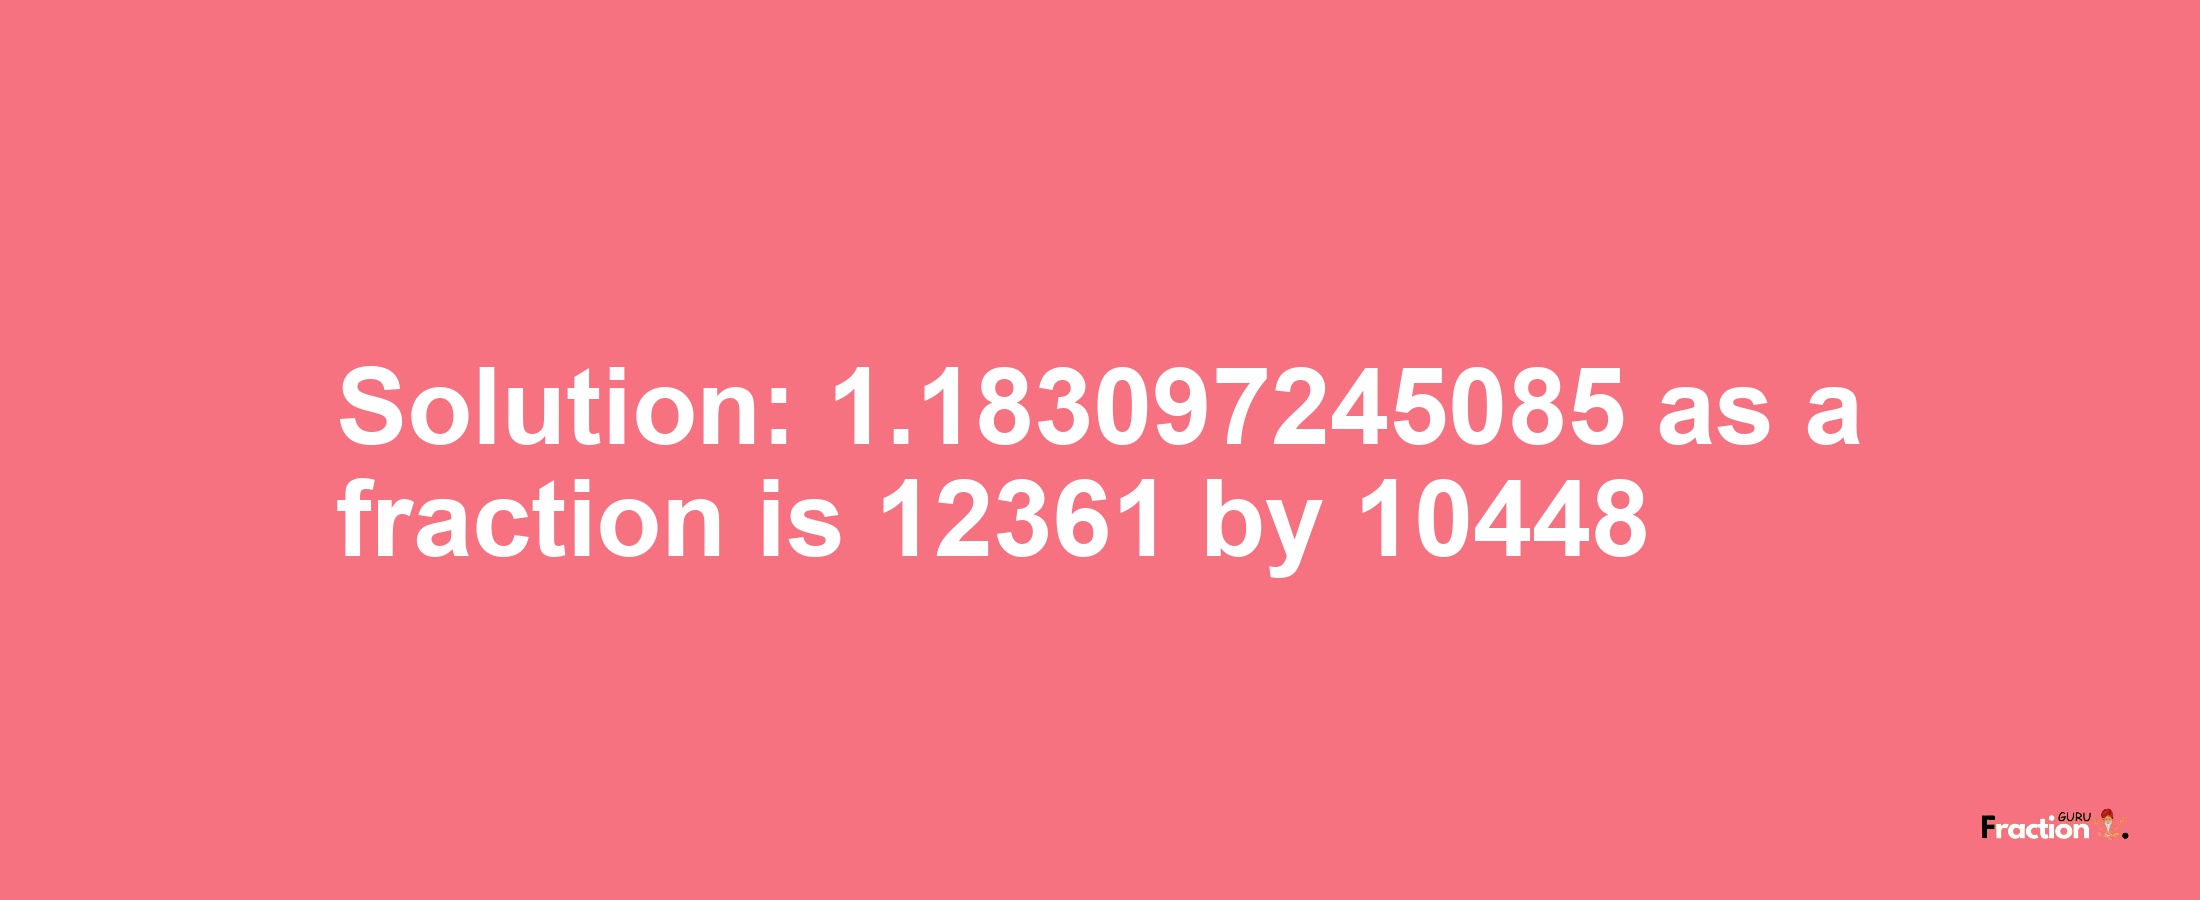 Solution:1.183097245085 as a fraction is 12361/10448